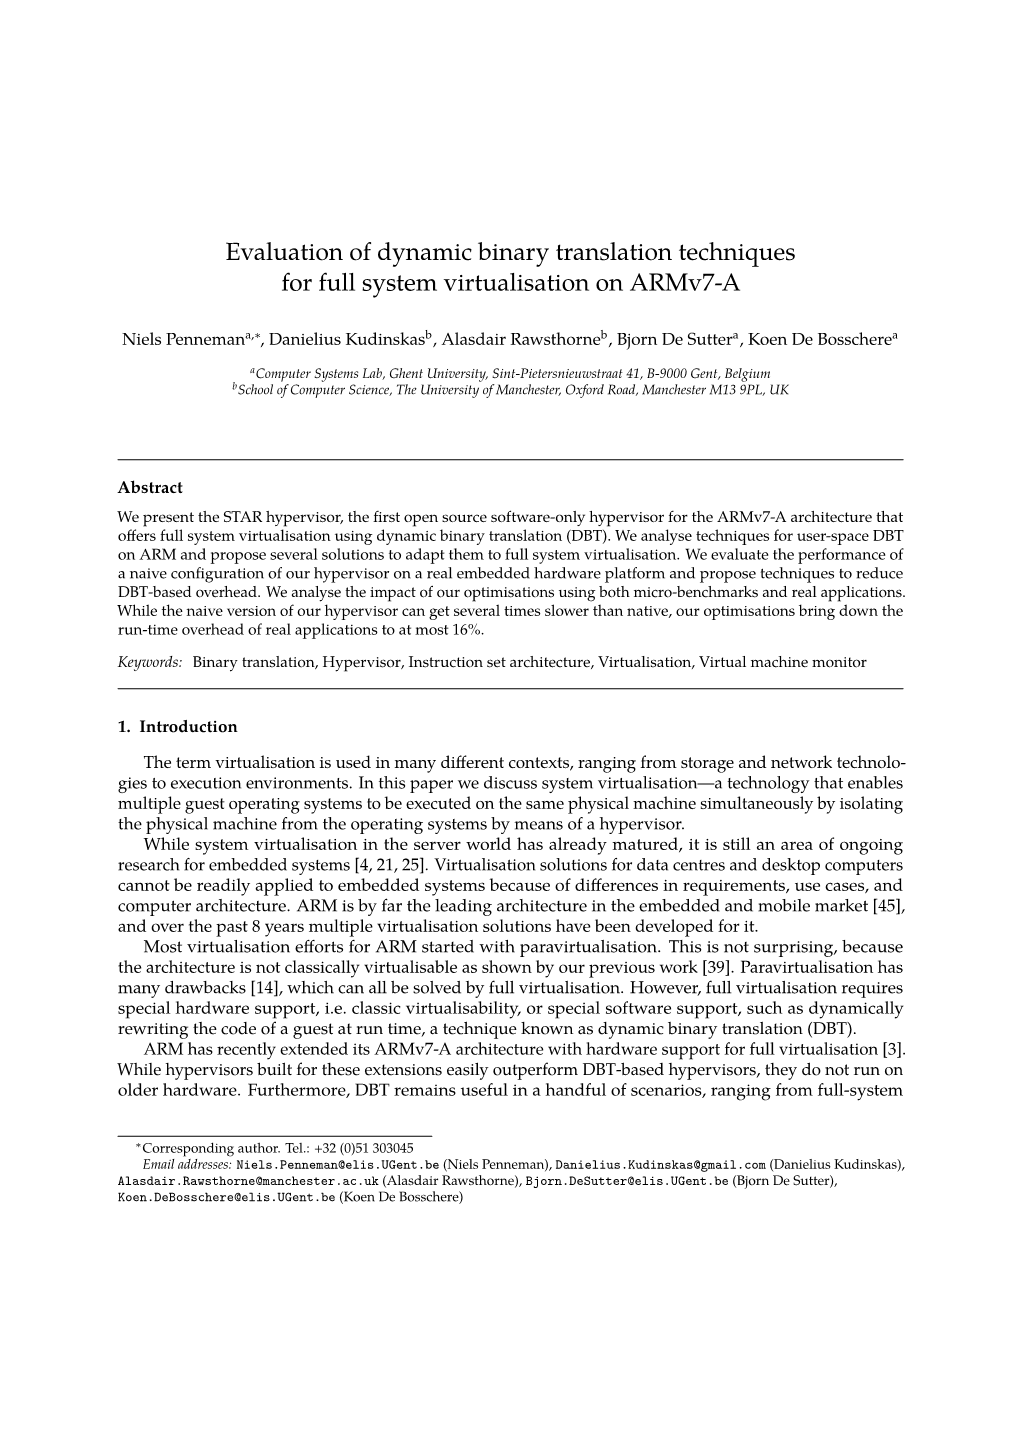 Evaluation of Dynamic Binary Translation Techniques for Full System Virtualisation on Armv7-A